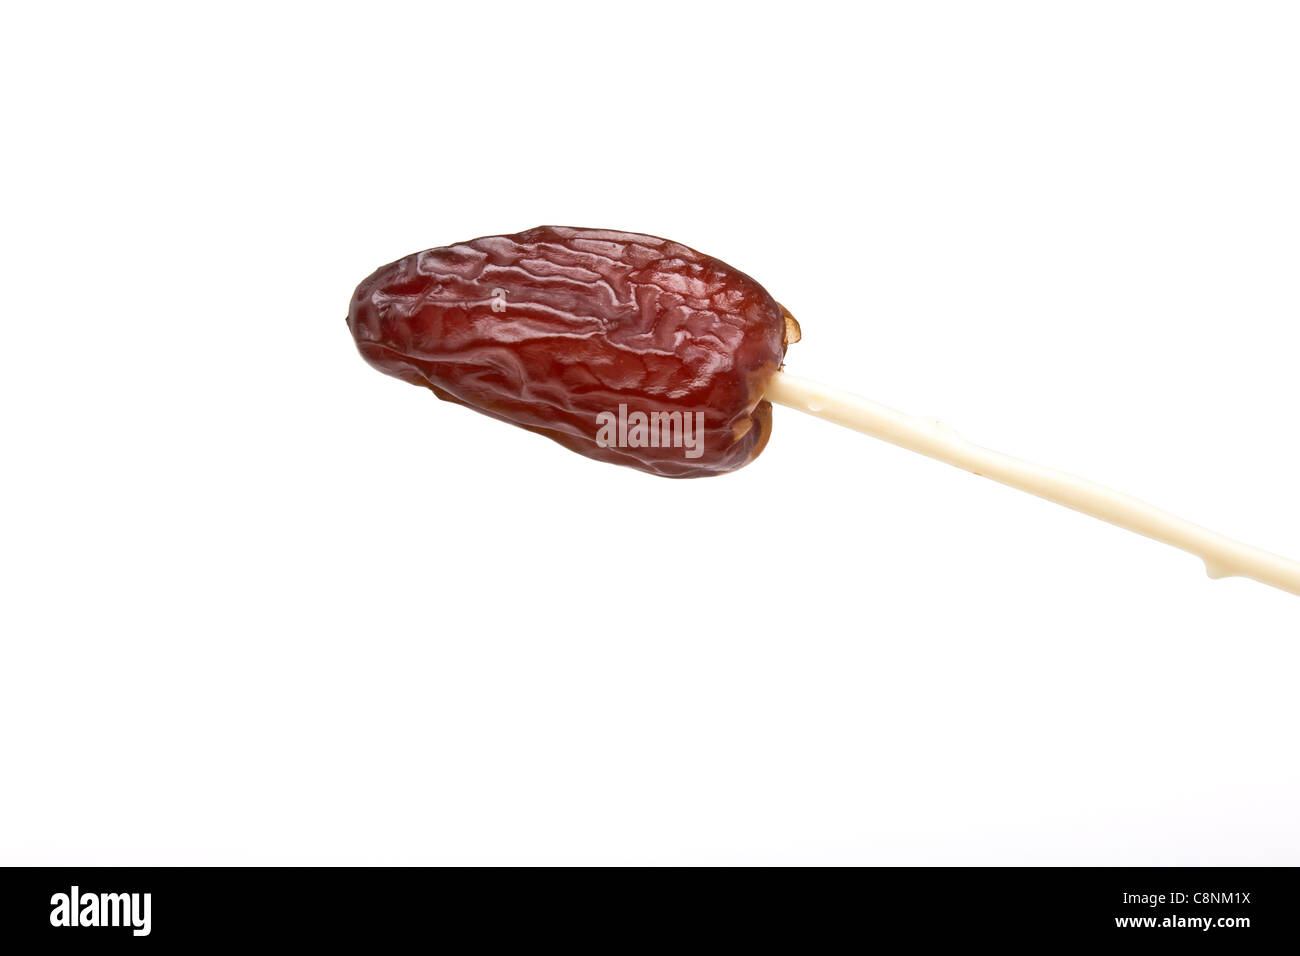 Single dried date fruit on plastic skewer used for eating them. Stock Photo